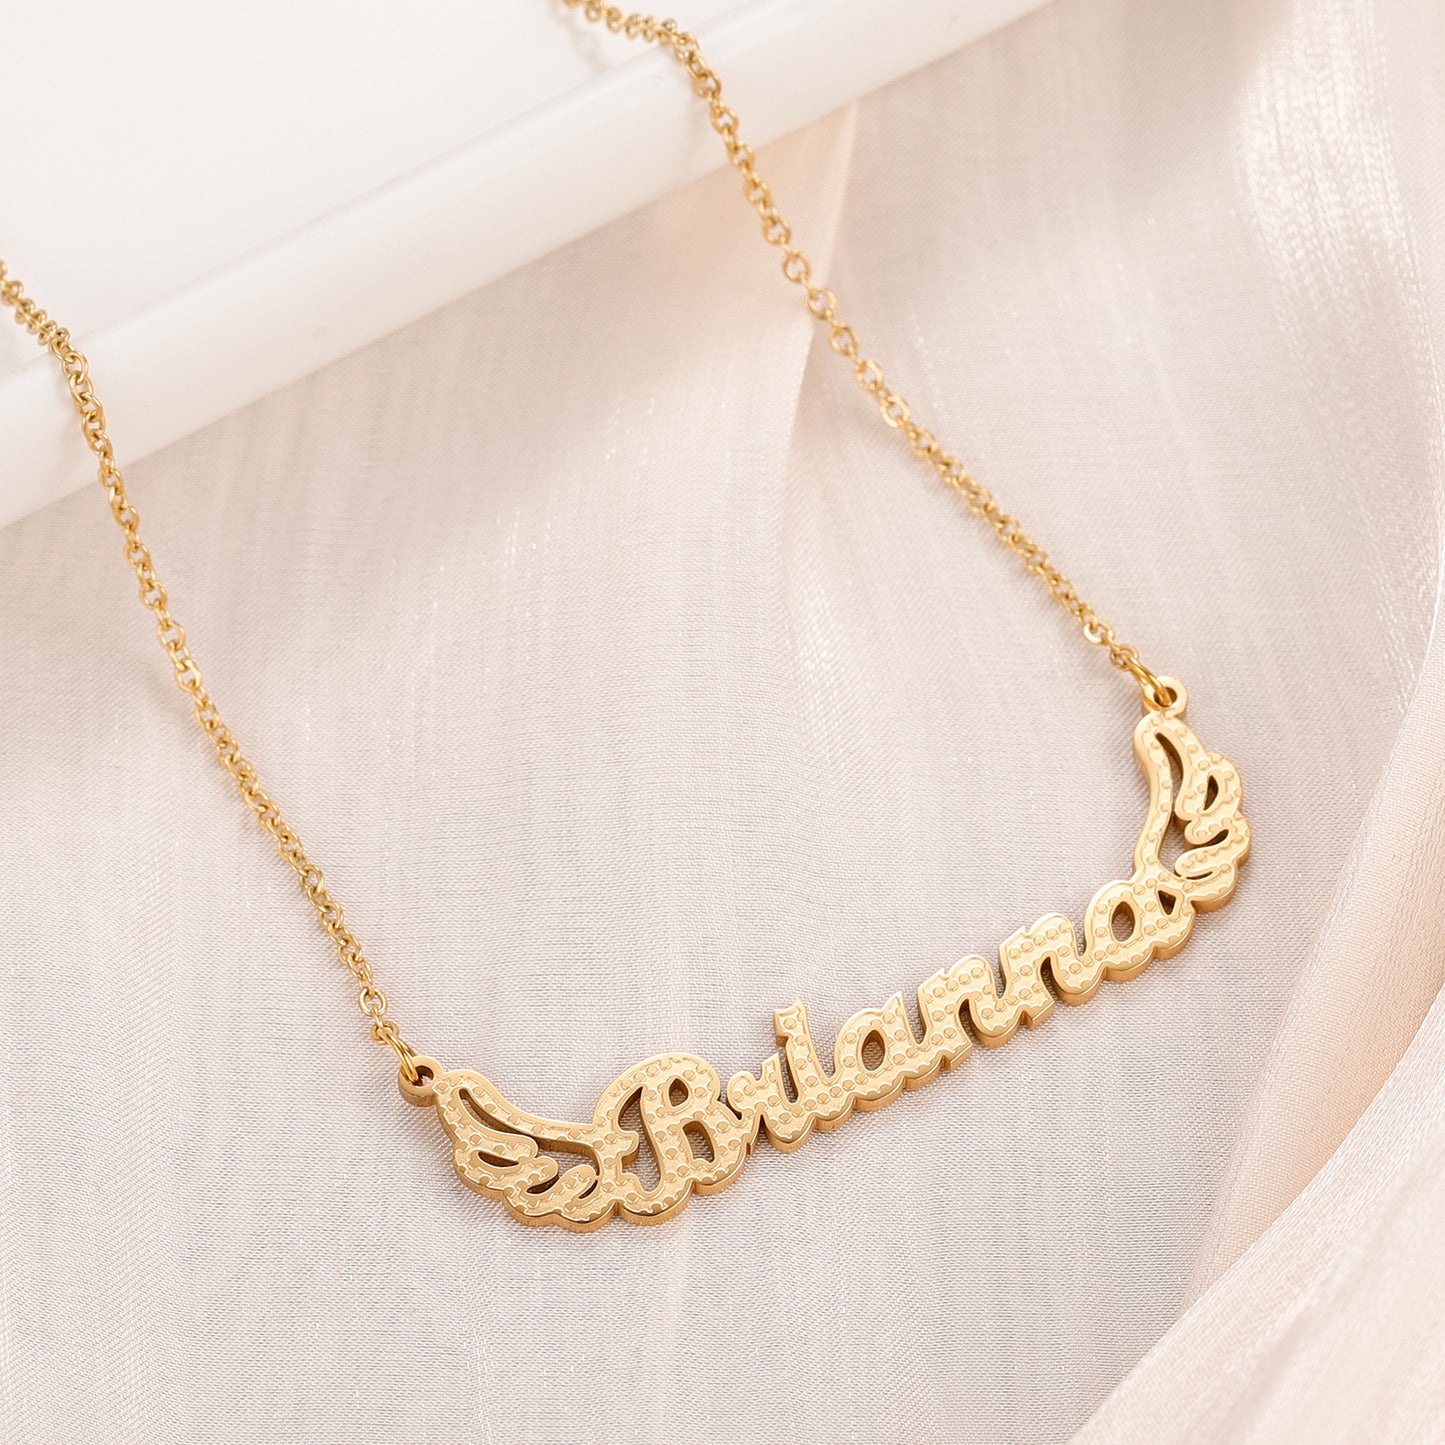 Personalised Bespoke Girls Single Name Necklace - (2years till 14 years)  - Mini me, Kids, Toddler, Teenager Angel Jewellery in Arabic English - Gifts Eid Birthday  - FAIRY